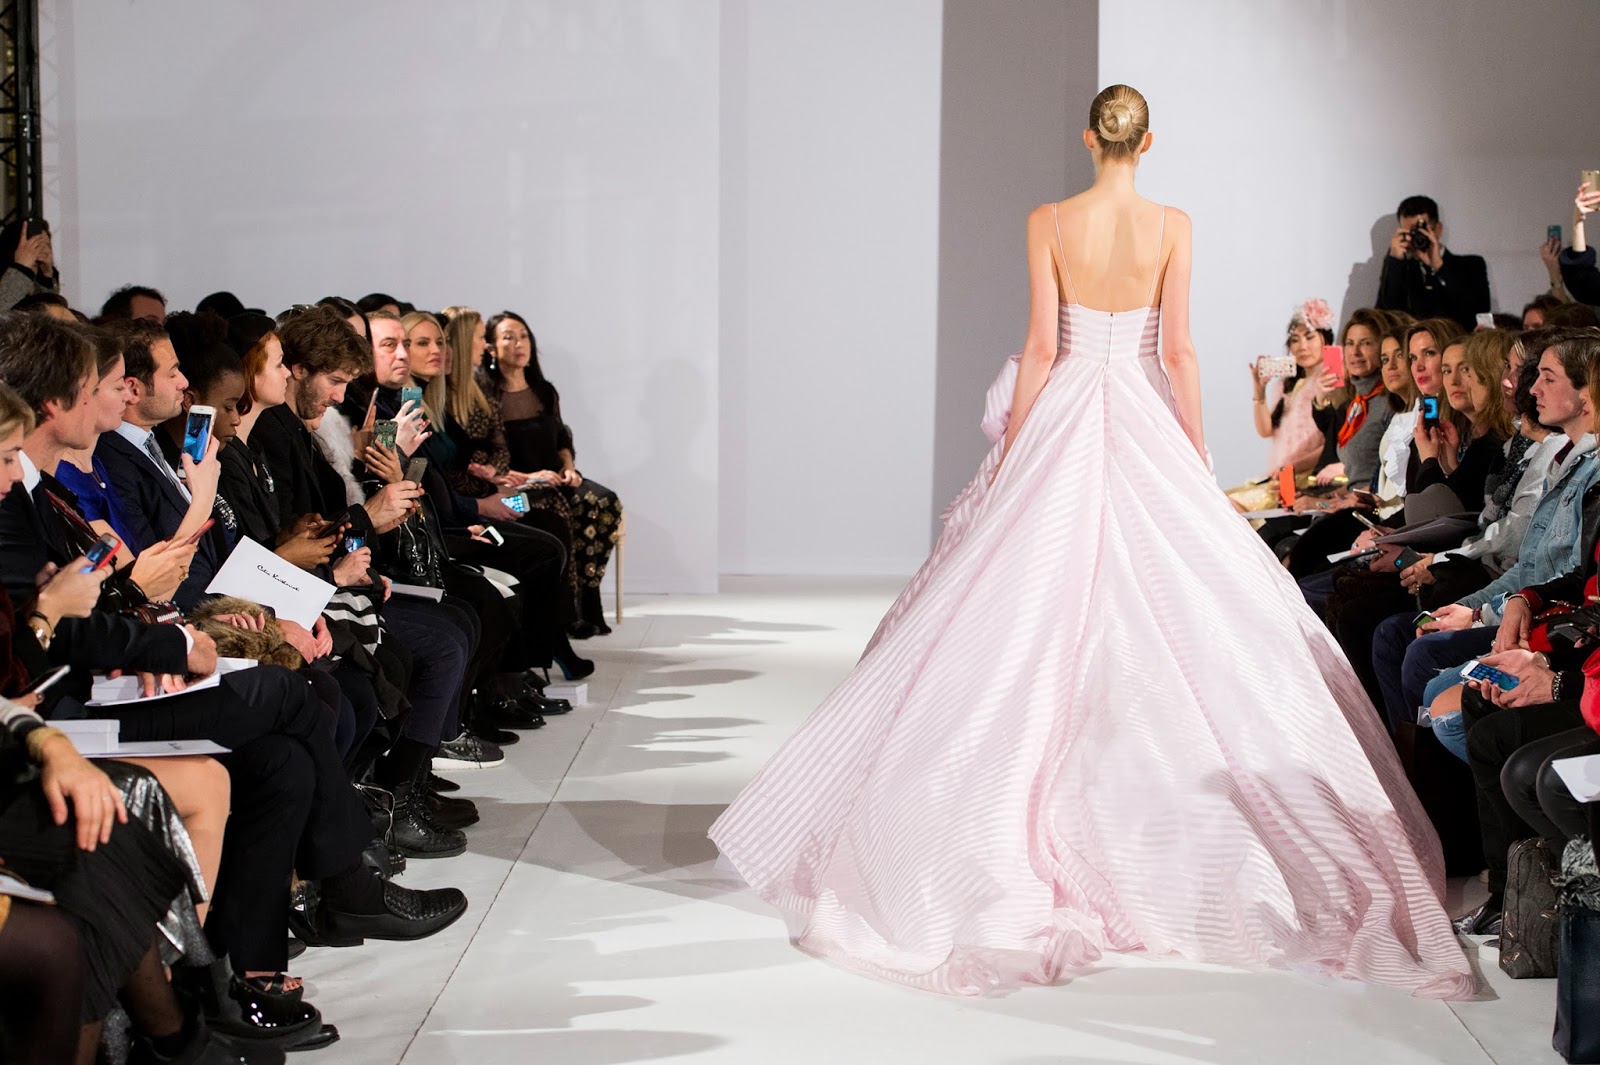 Stunning Gowns by CELIA KRITHARIOTI